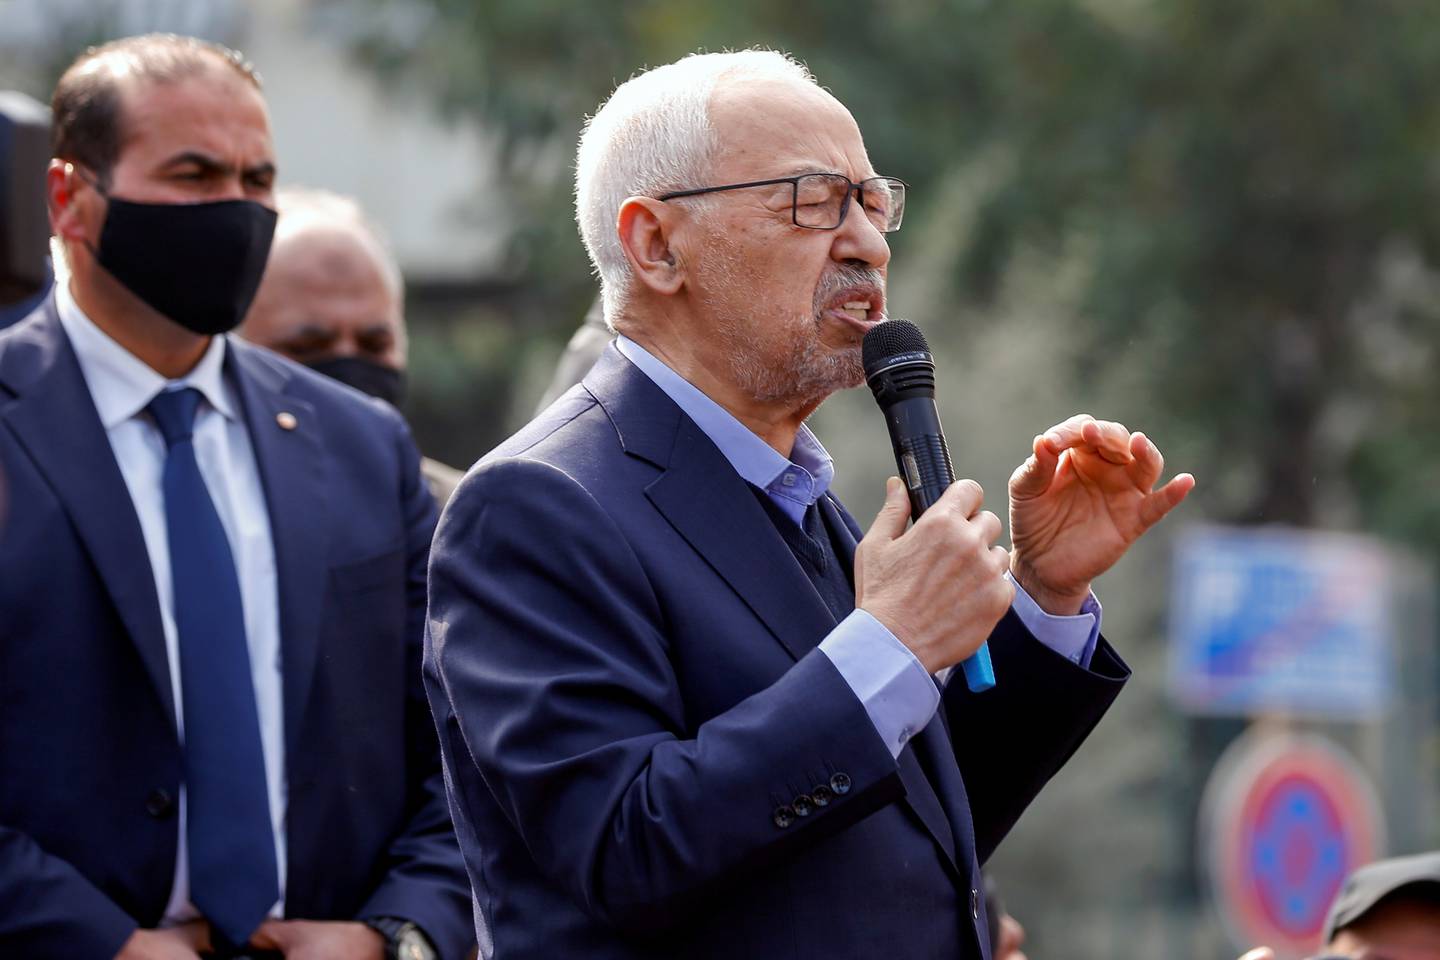 Speaker Rached Ghannouchi was prevented from entering the parliament building. Reuters